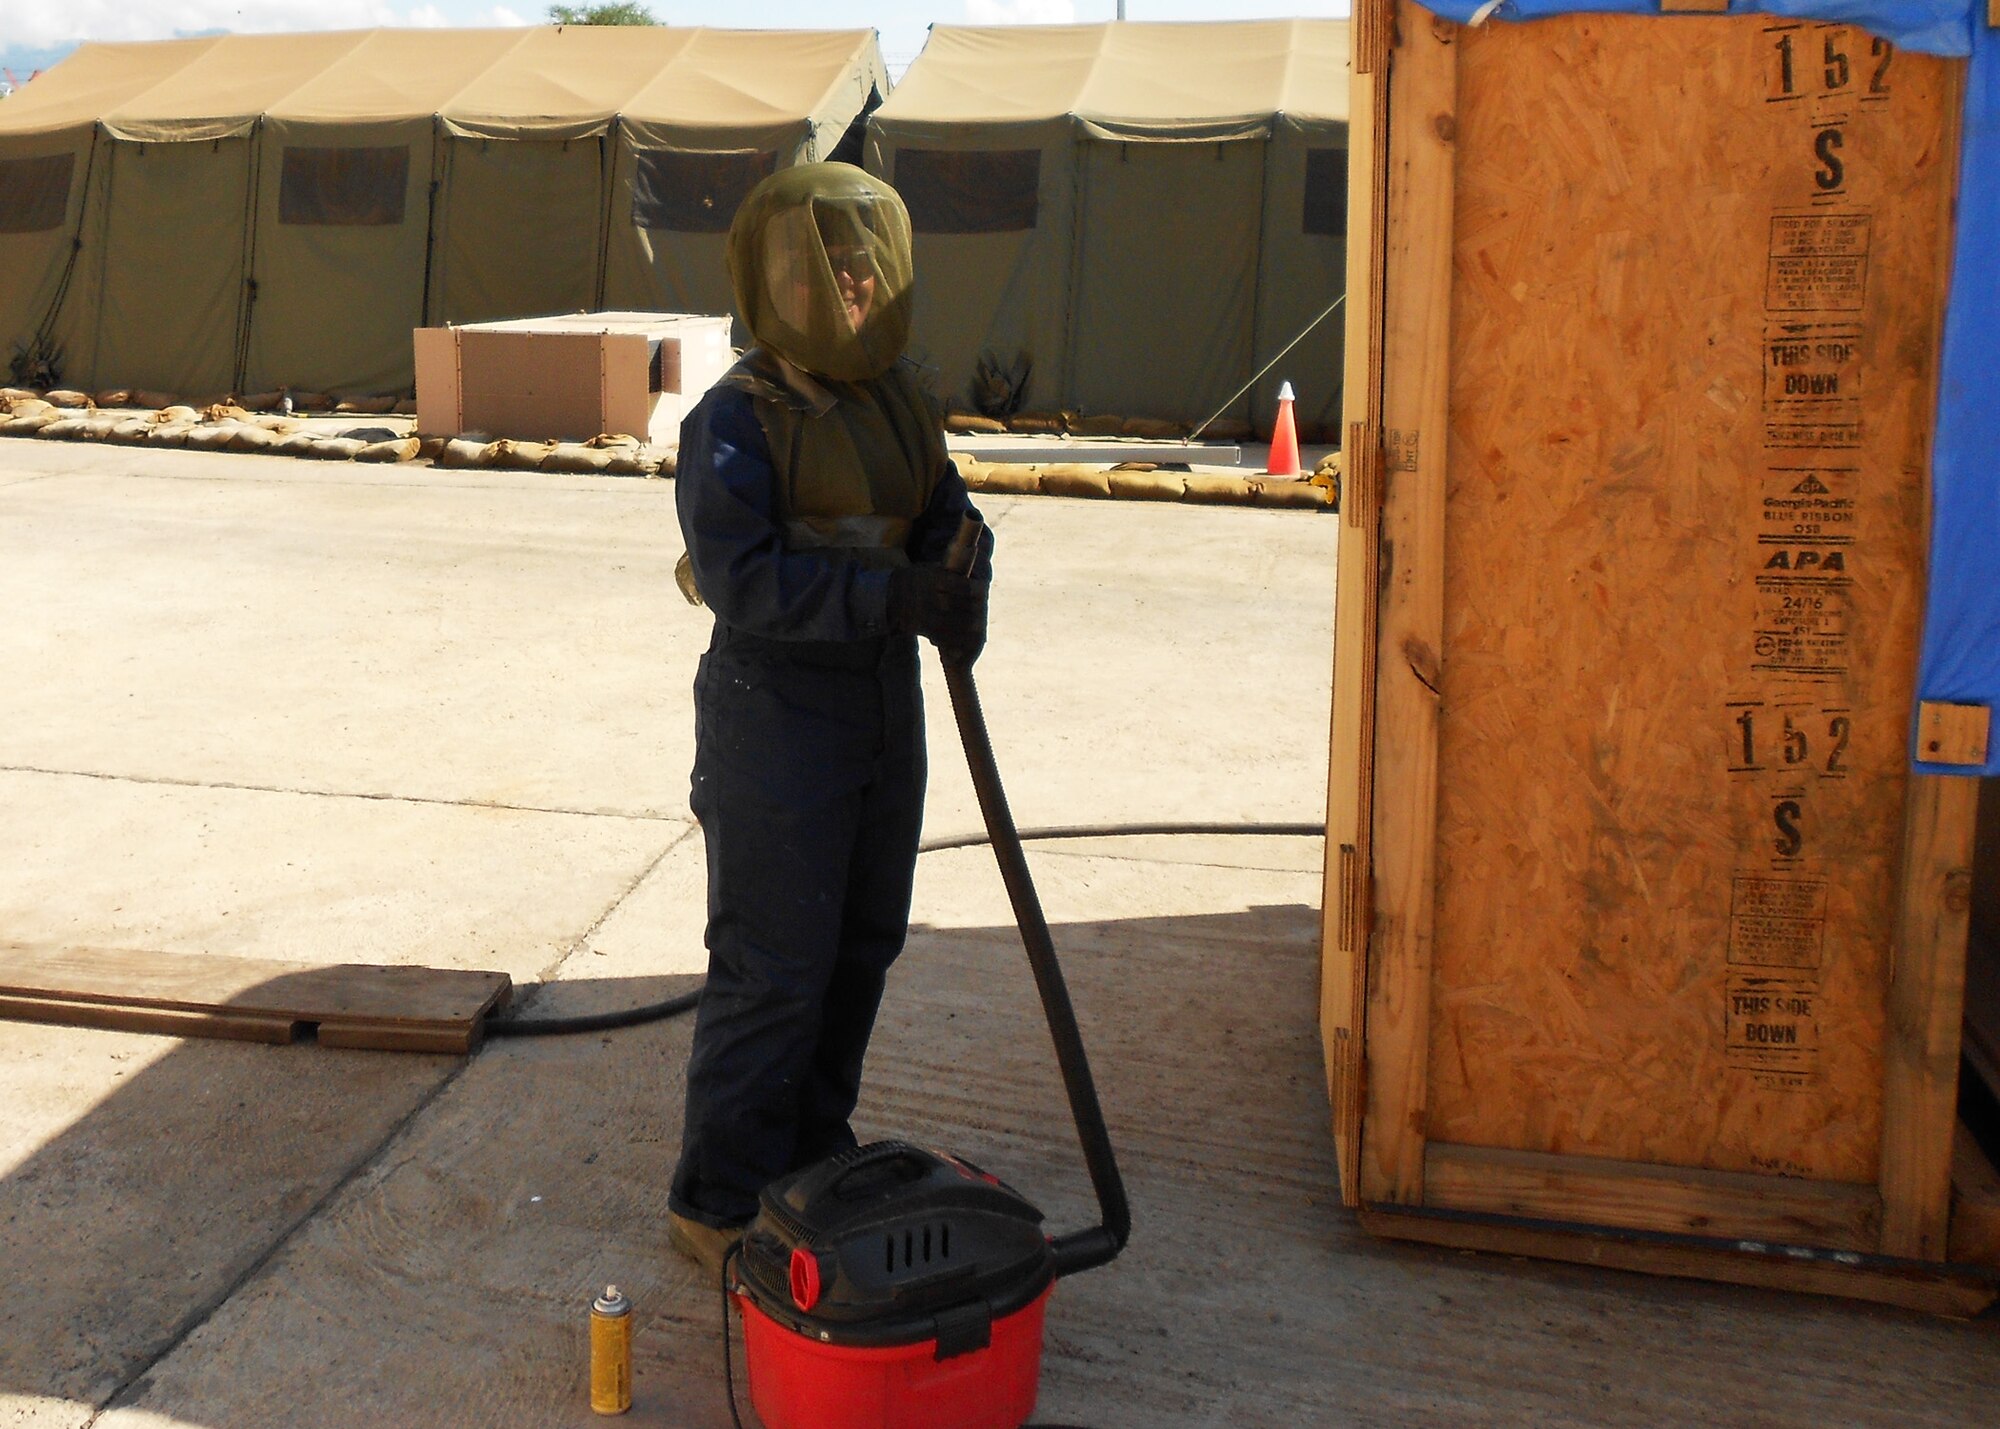 Air Force Reserve Master Sgt. Jennifer Alexander is shown displaying protective gear and a vacuum she uses to eradicate dangerous African bee populations impacting personnel at her U.S. Africa Command forward operating base.  In her duties as the deployed pest control manager, the Duke Field civil engineering Airman often works with host nation military officials to eliminate dangerous wildlife hazards and ensure non-threatening wildlife found on and near her base are safely returned to the wild. (Courtesy photo)